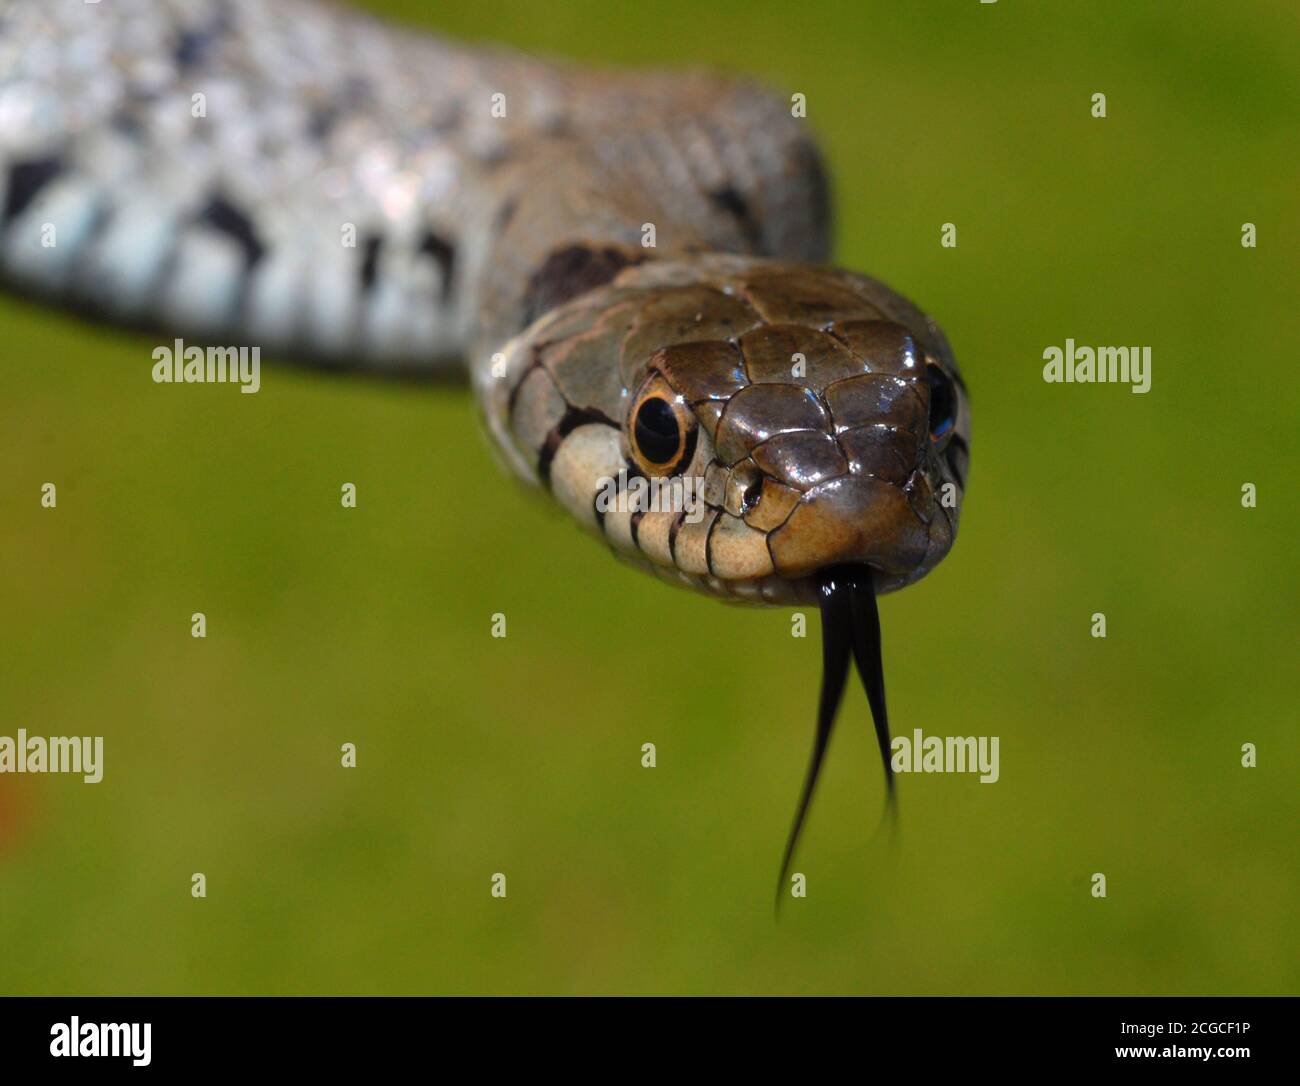 European Grass Snake aka Ringed Snake. Latin name: Natrix natrix helvetica. Recognized by the yellow and black collar markings and olive green/olive b Stock Photo